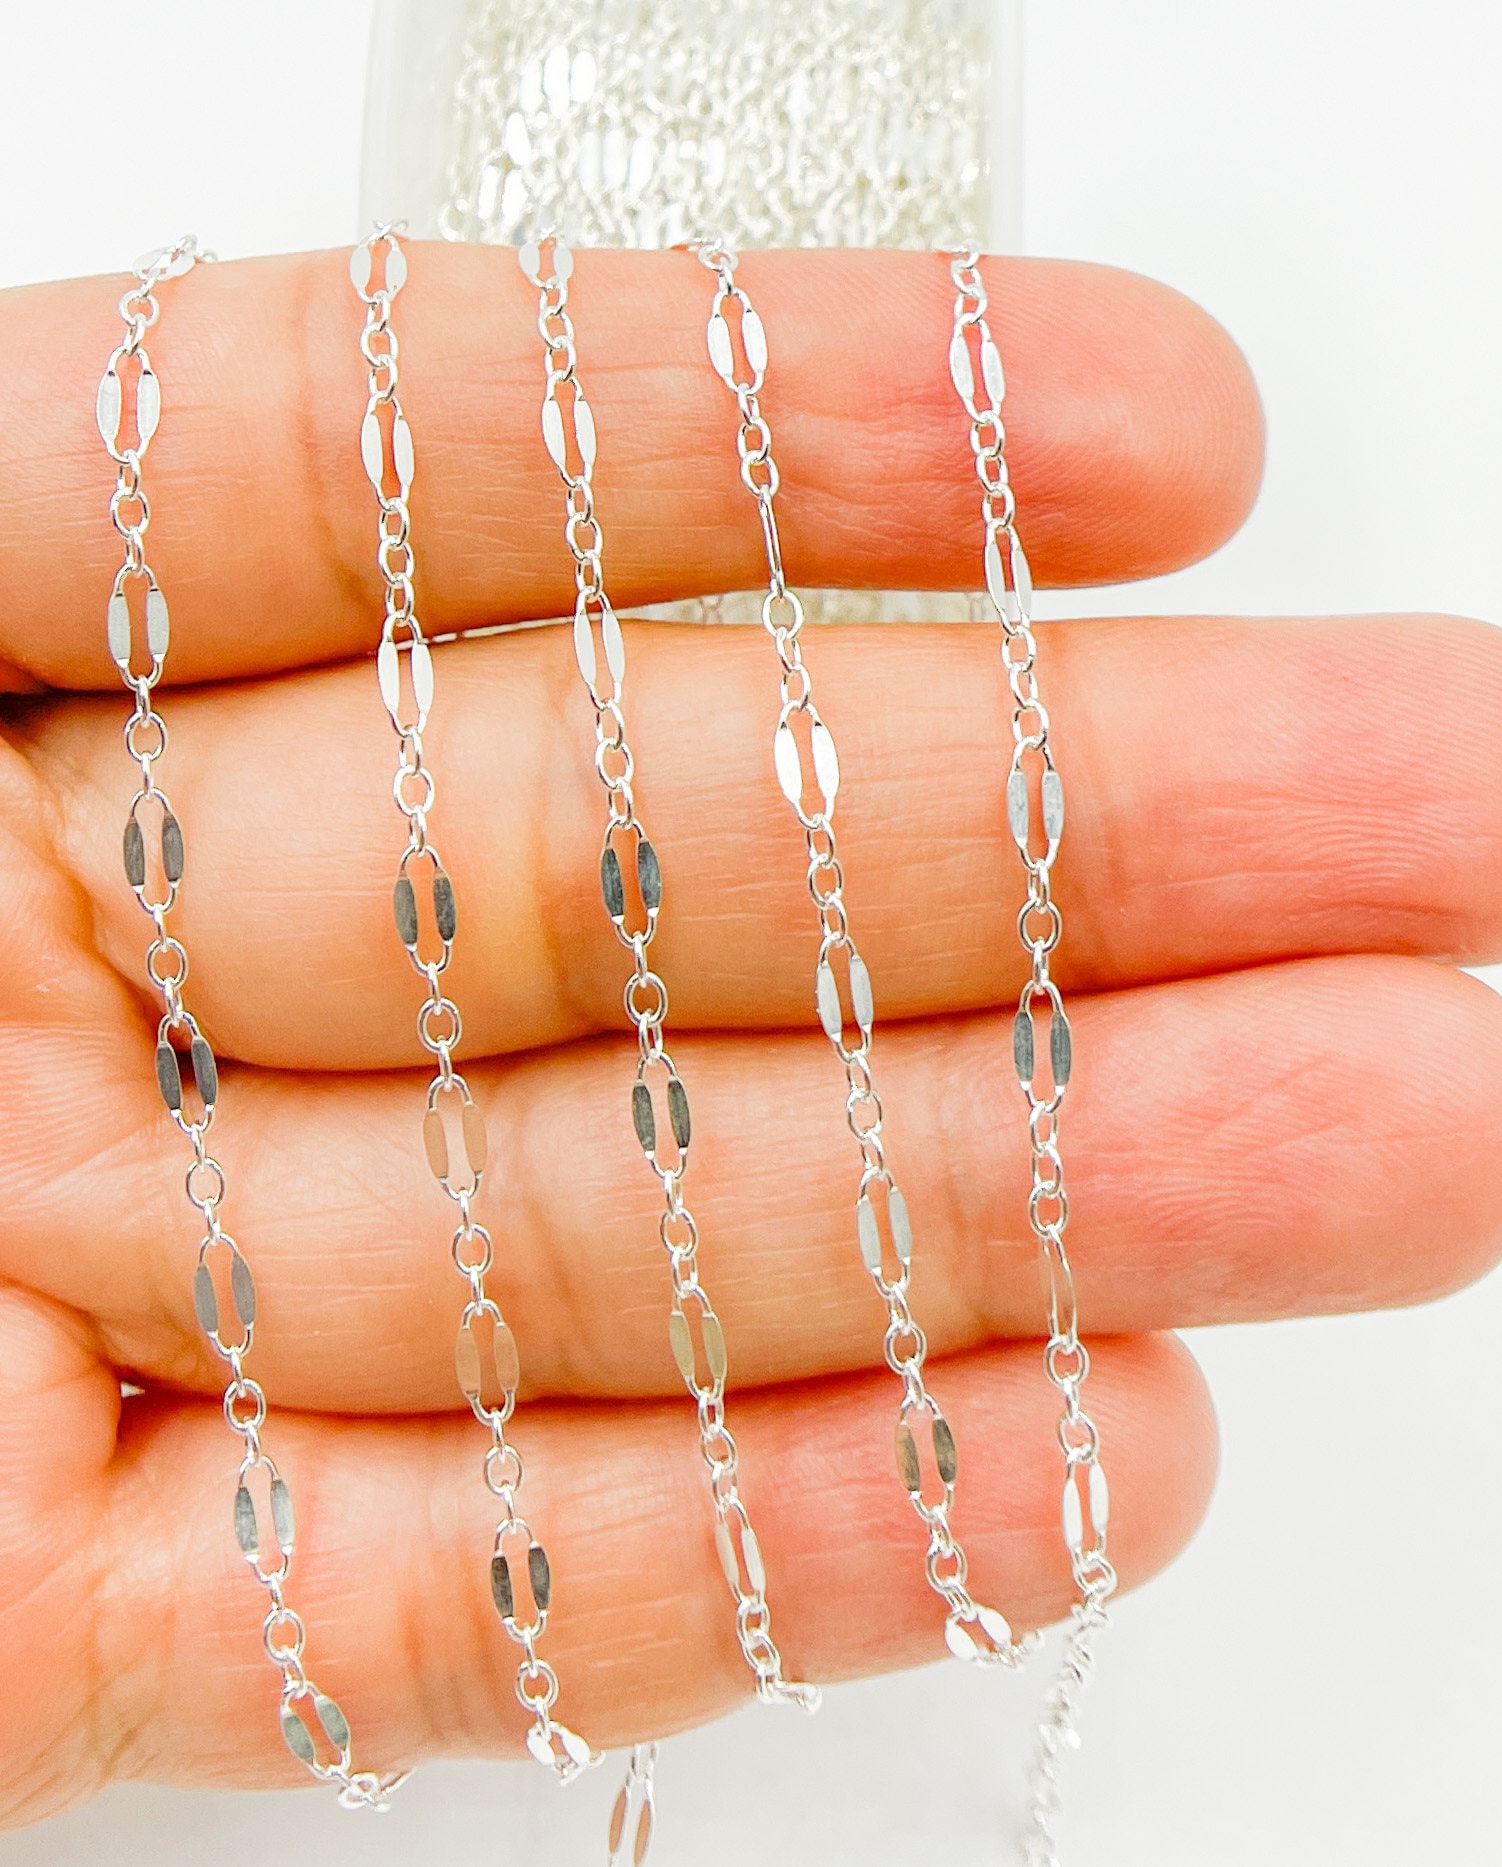 Silver Finding Chain, Silver Plated DIY Jewelry Chain, DIY Necklace Chain,  Silver Purse Chain Replacement, Assorted Styles, 1 foot, GemMartUSA (SPCH)